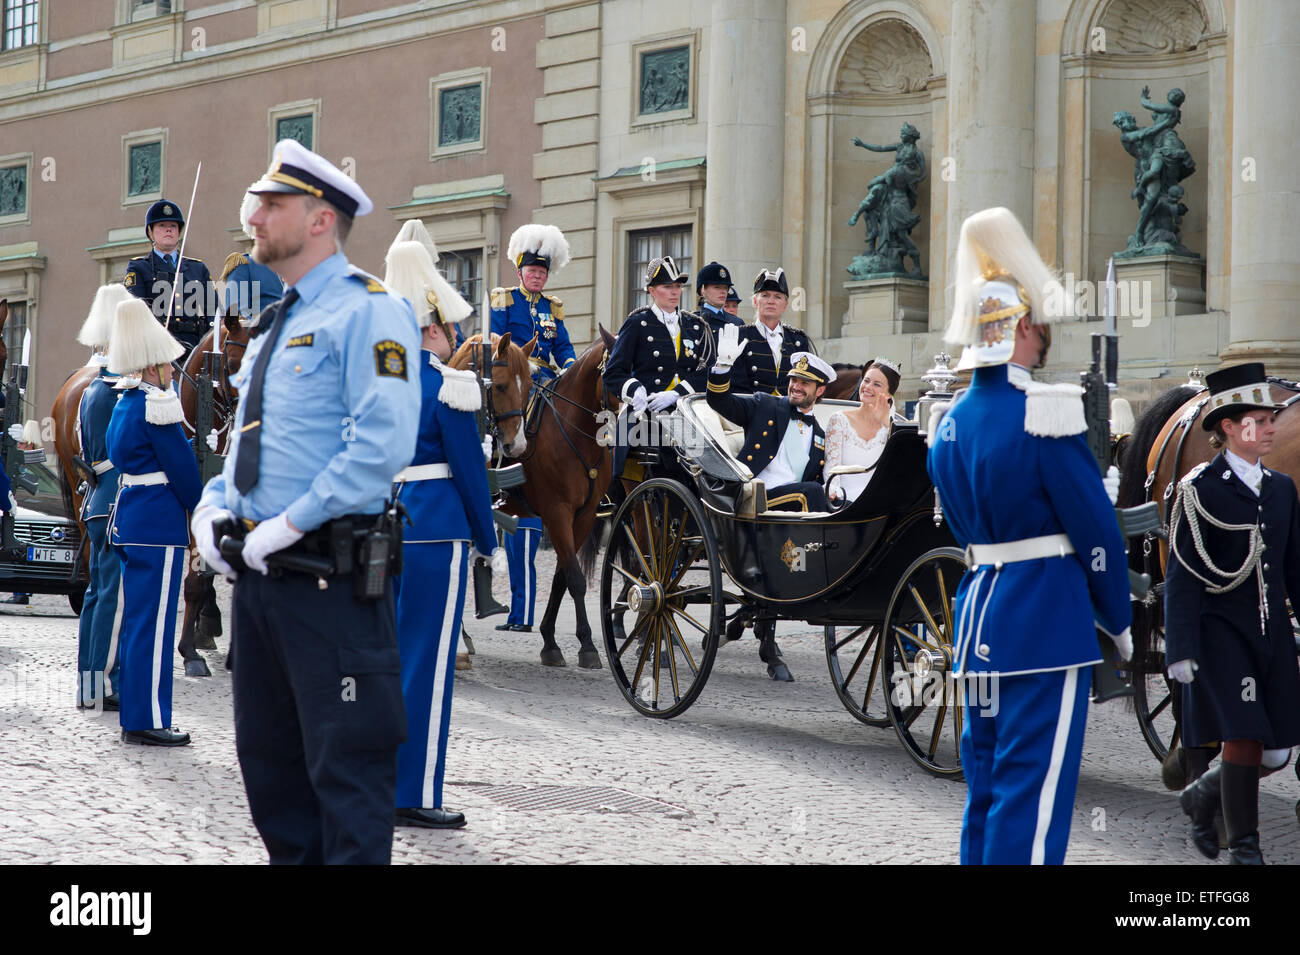 Stockholm, Sweden, June 13, 2015. The wedding of HRH Prince Carl Philip and Princess Sofia, Sweden. HRH Prince Carl Philip and Princess Sofia are leaving the Royal chapel by carriage. The cortege goes through Stockholm. Credit:  Barbro Bergfeldt/Alamy Live News Stock Photo